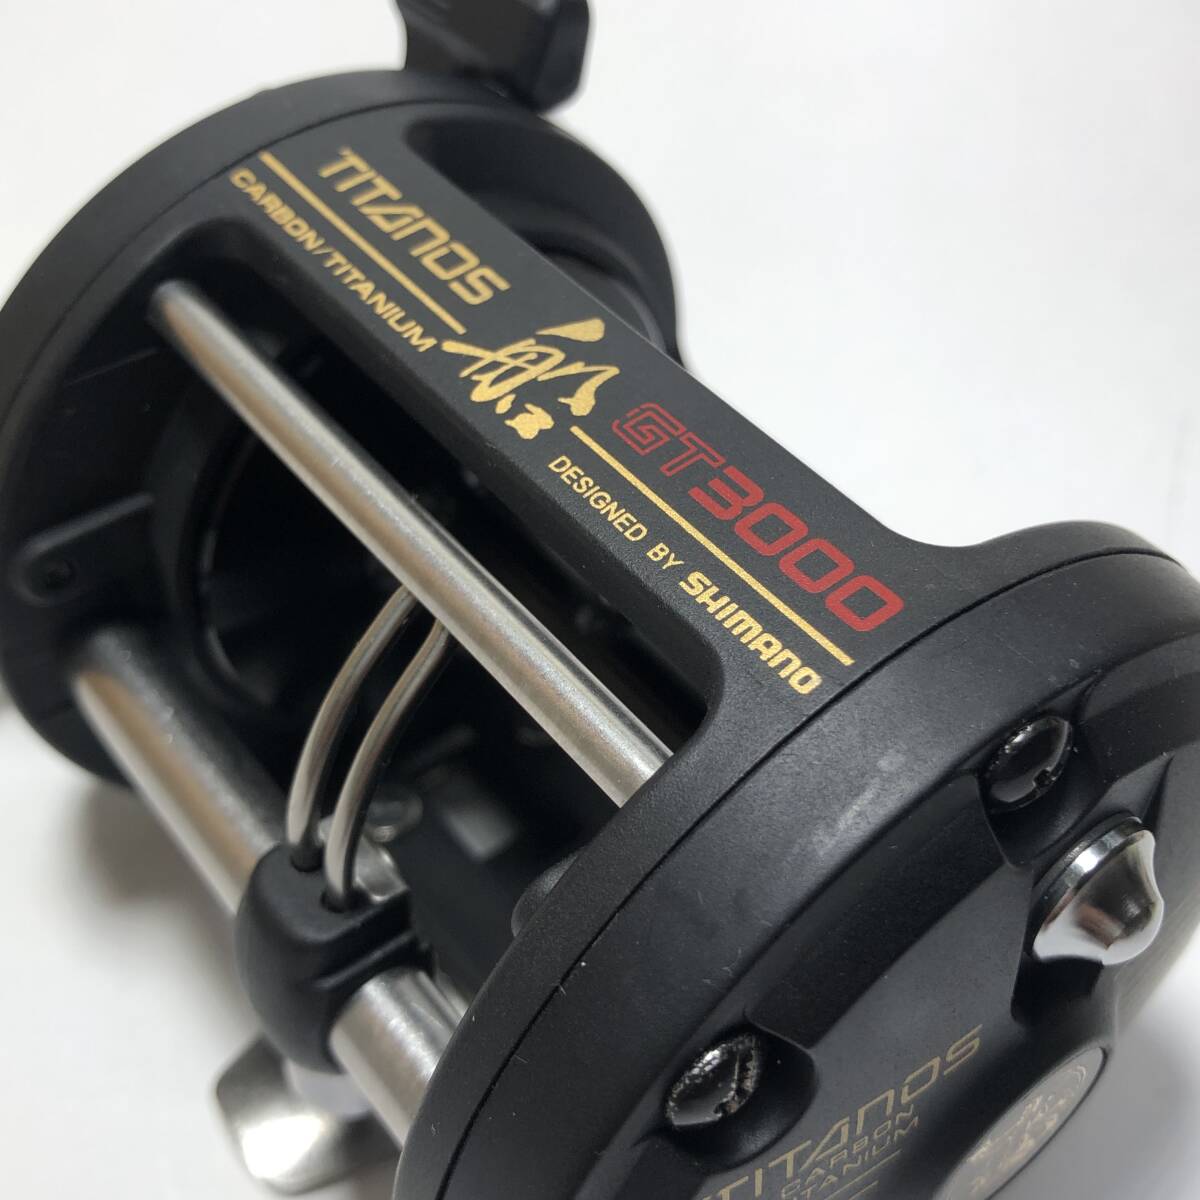 SHIMANO TITANOS boat GT-3000 Shimano Titanos boat GT-3000 service being completed secondhand goods (No.2312)